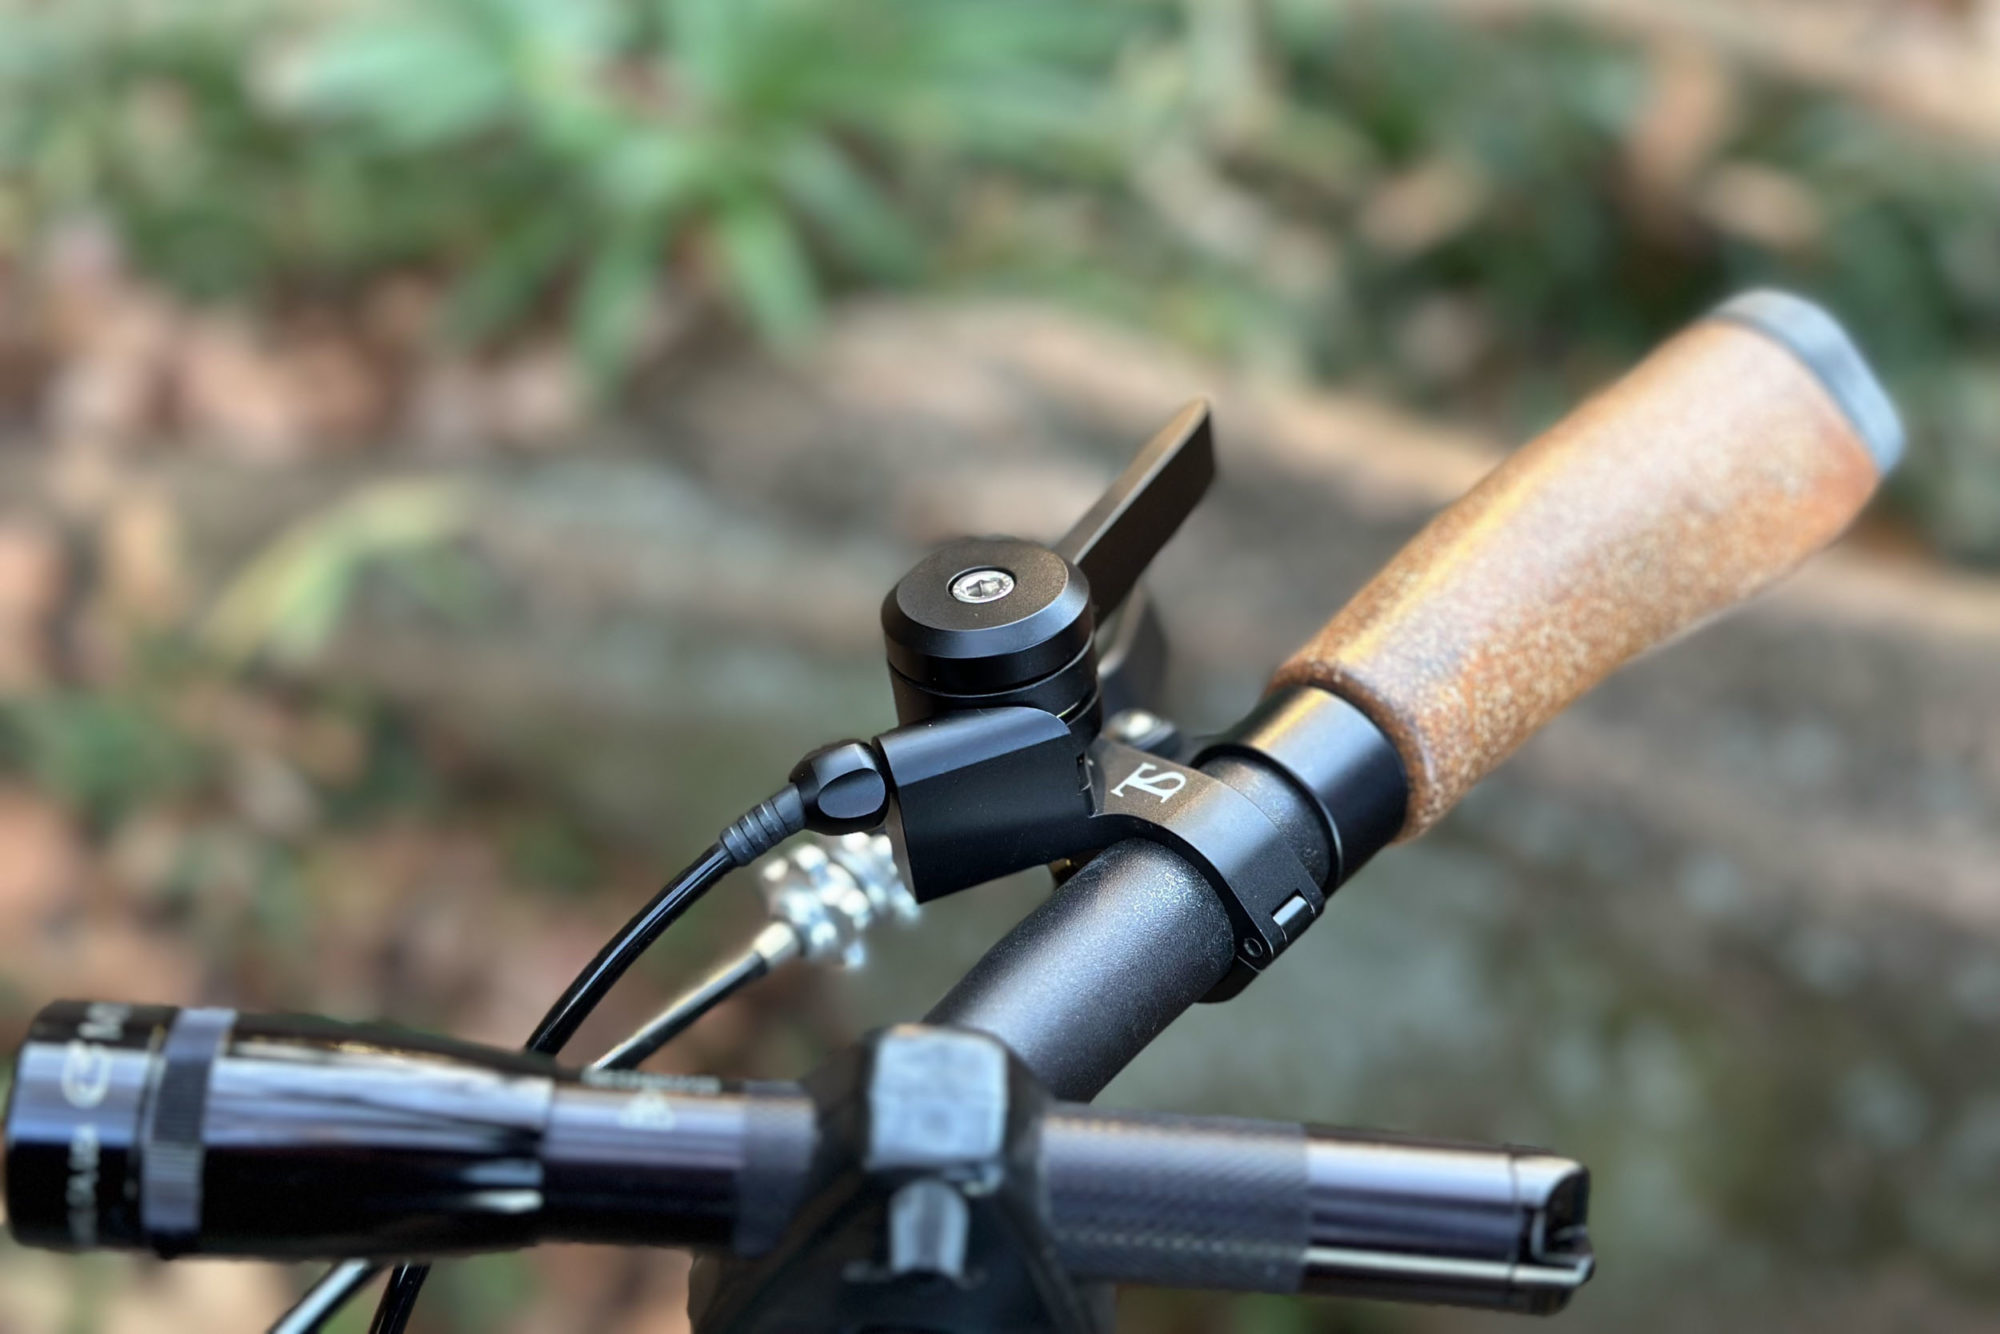 thumbster shifter